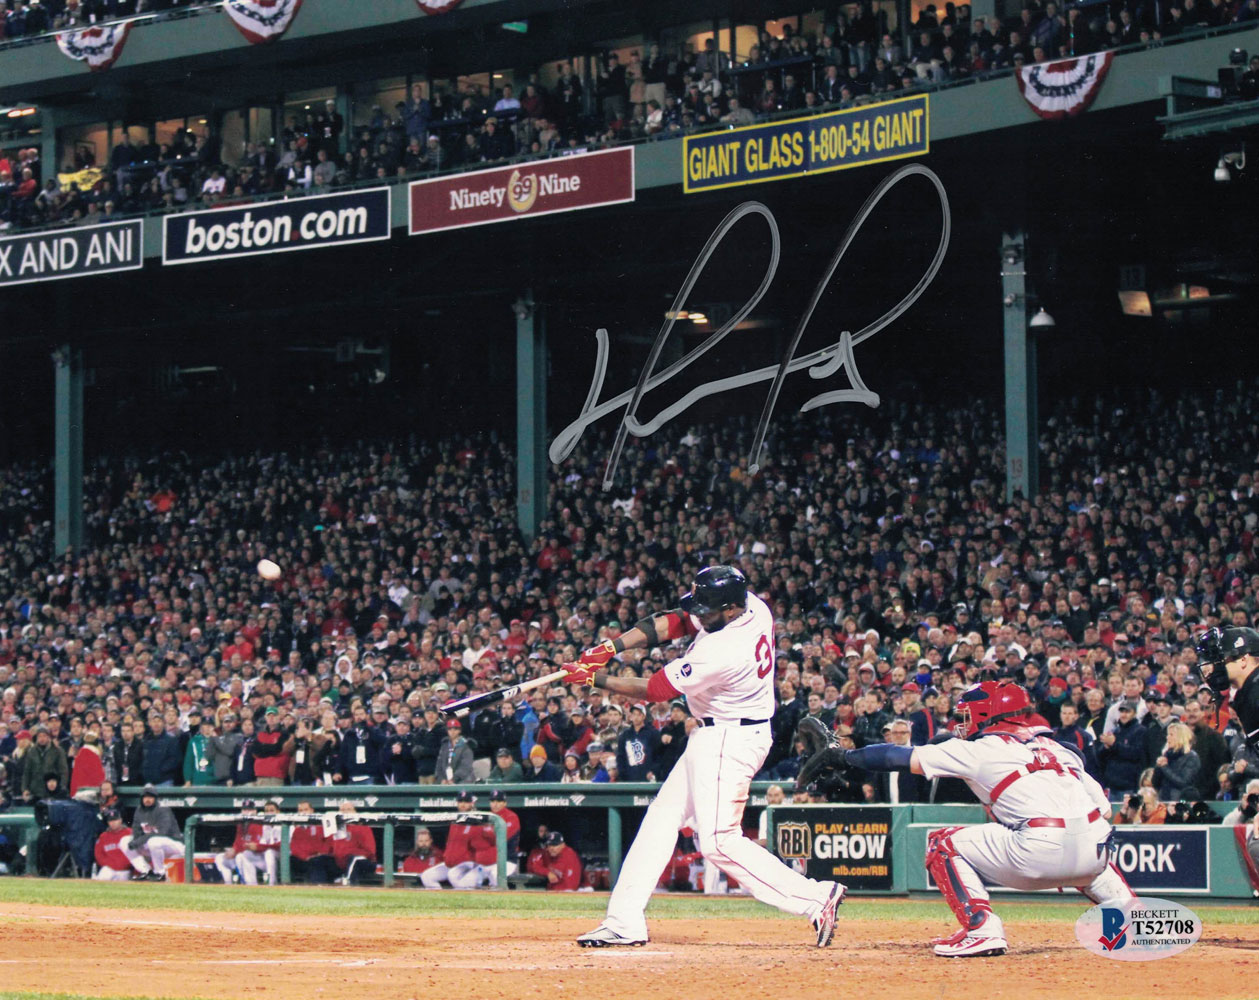 David Ortiz Autographed/Signed Boston Red Sox 8x10 Photo BAS 26878